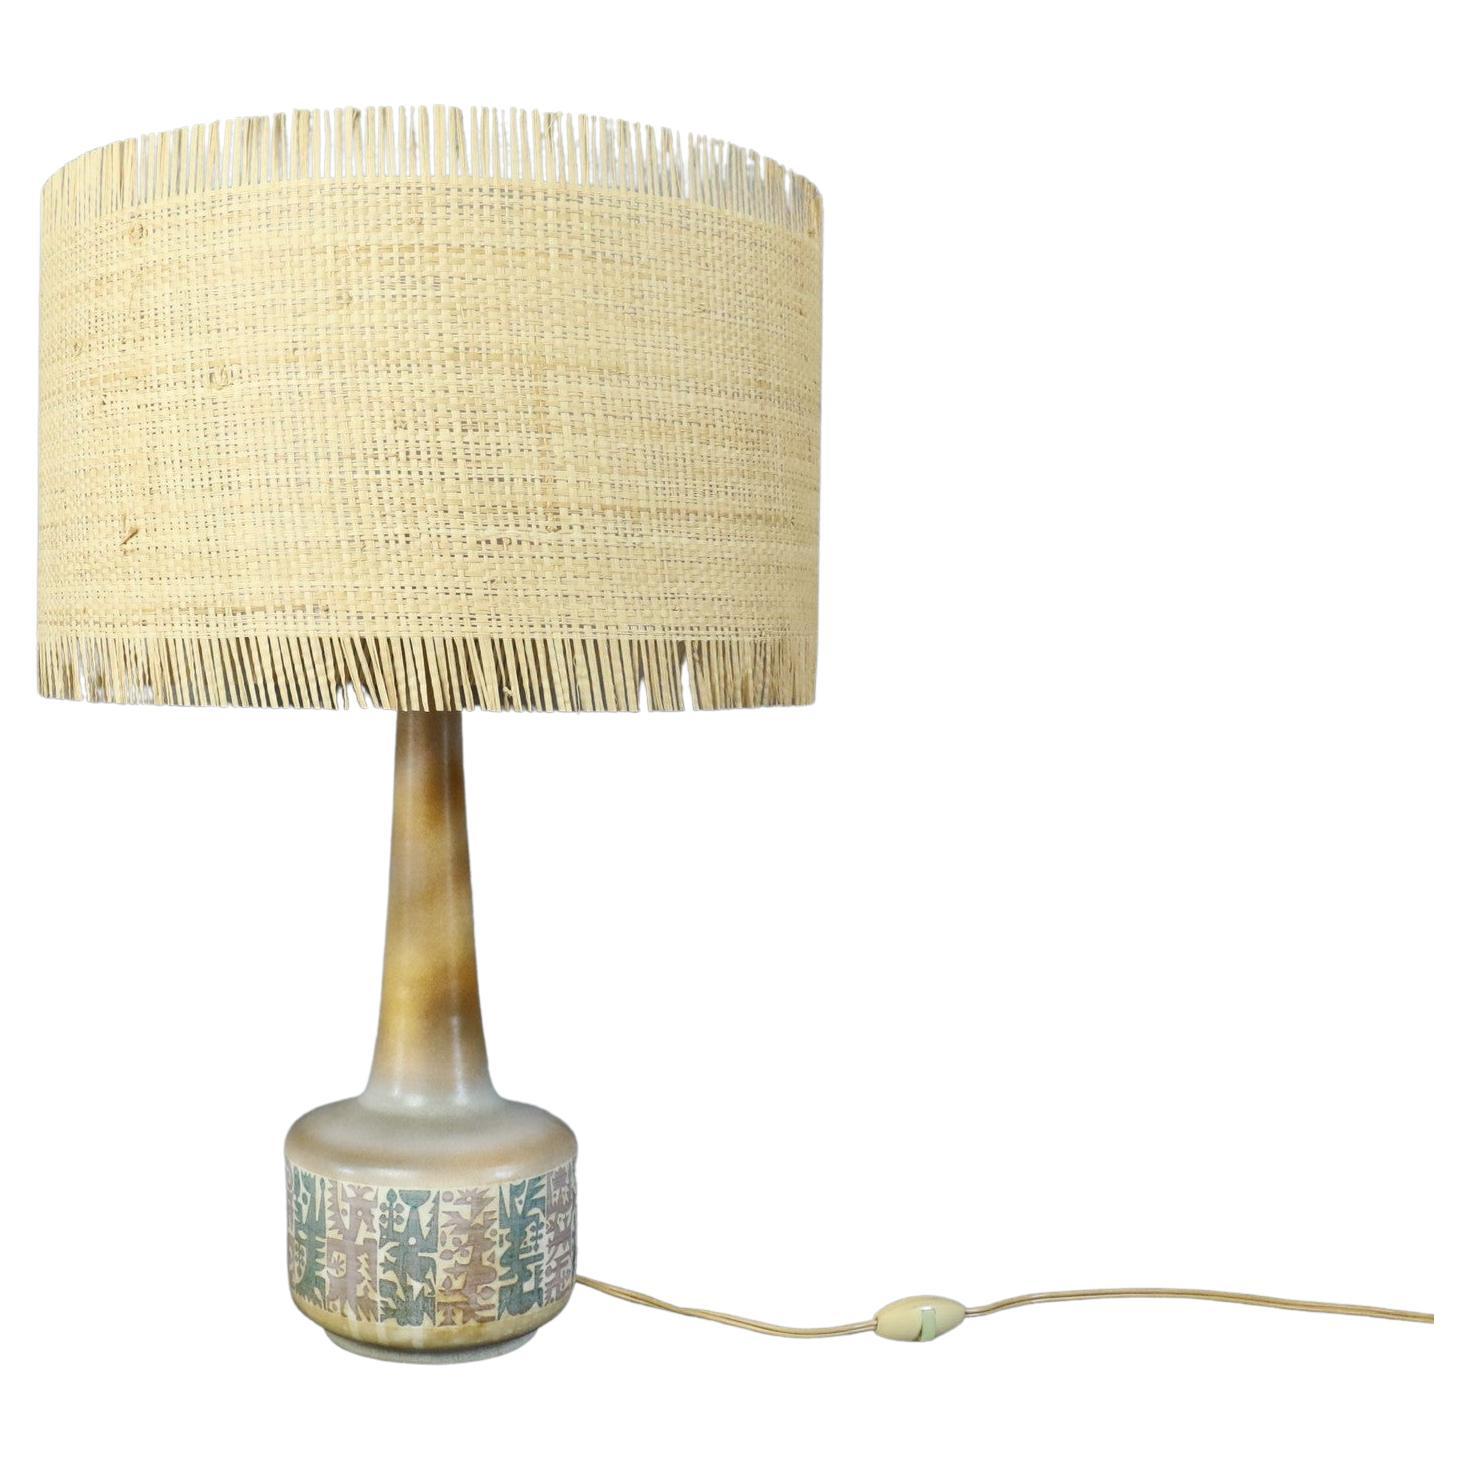 Mid-Century Modern 20th Century French Ceramic Lamp by René Maurel, 1973's For Sale